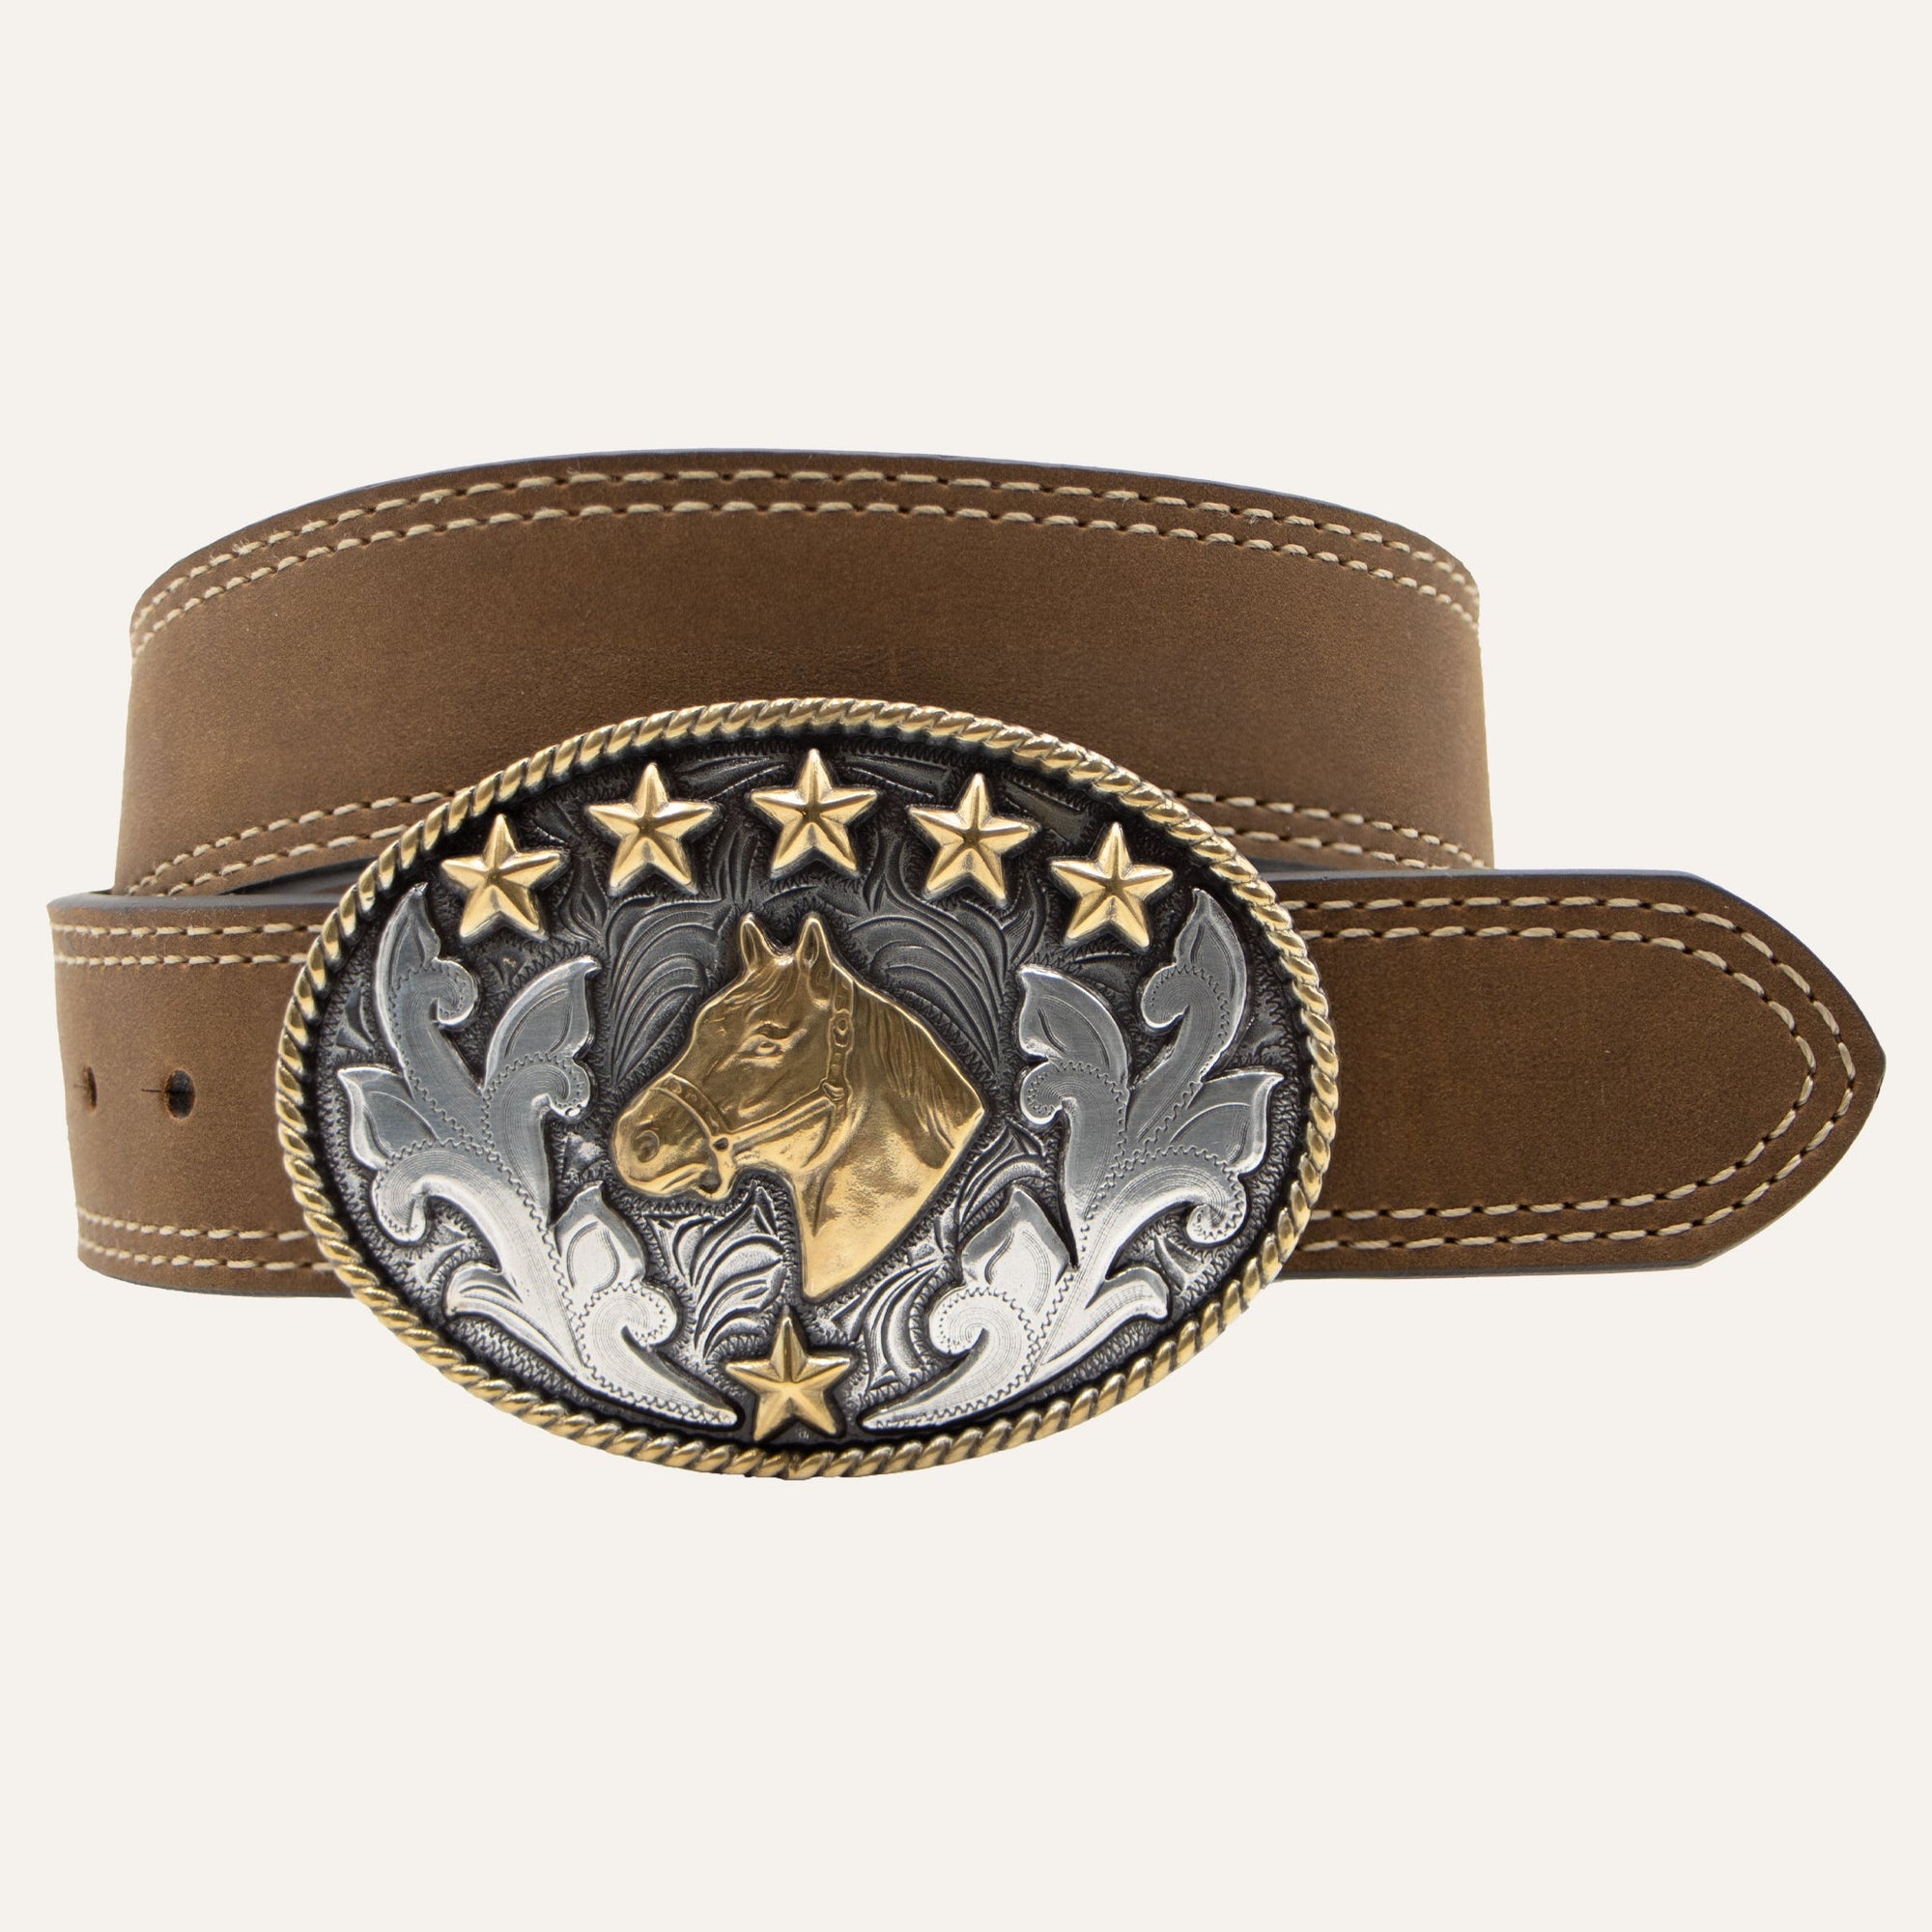 Kids’ 1 1/4" Horse Head Buckle with Double Stitch Belt